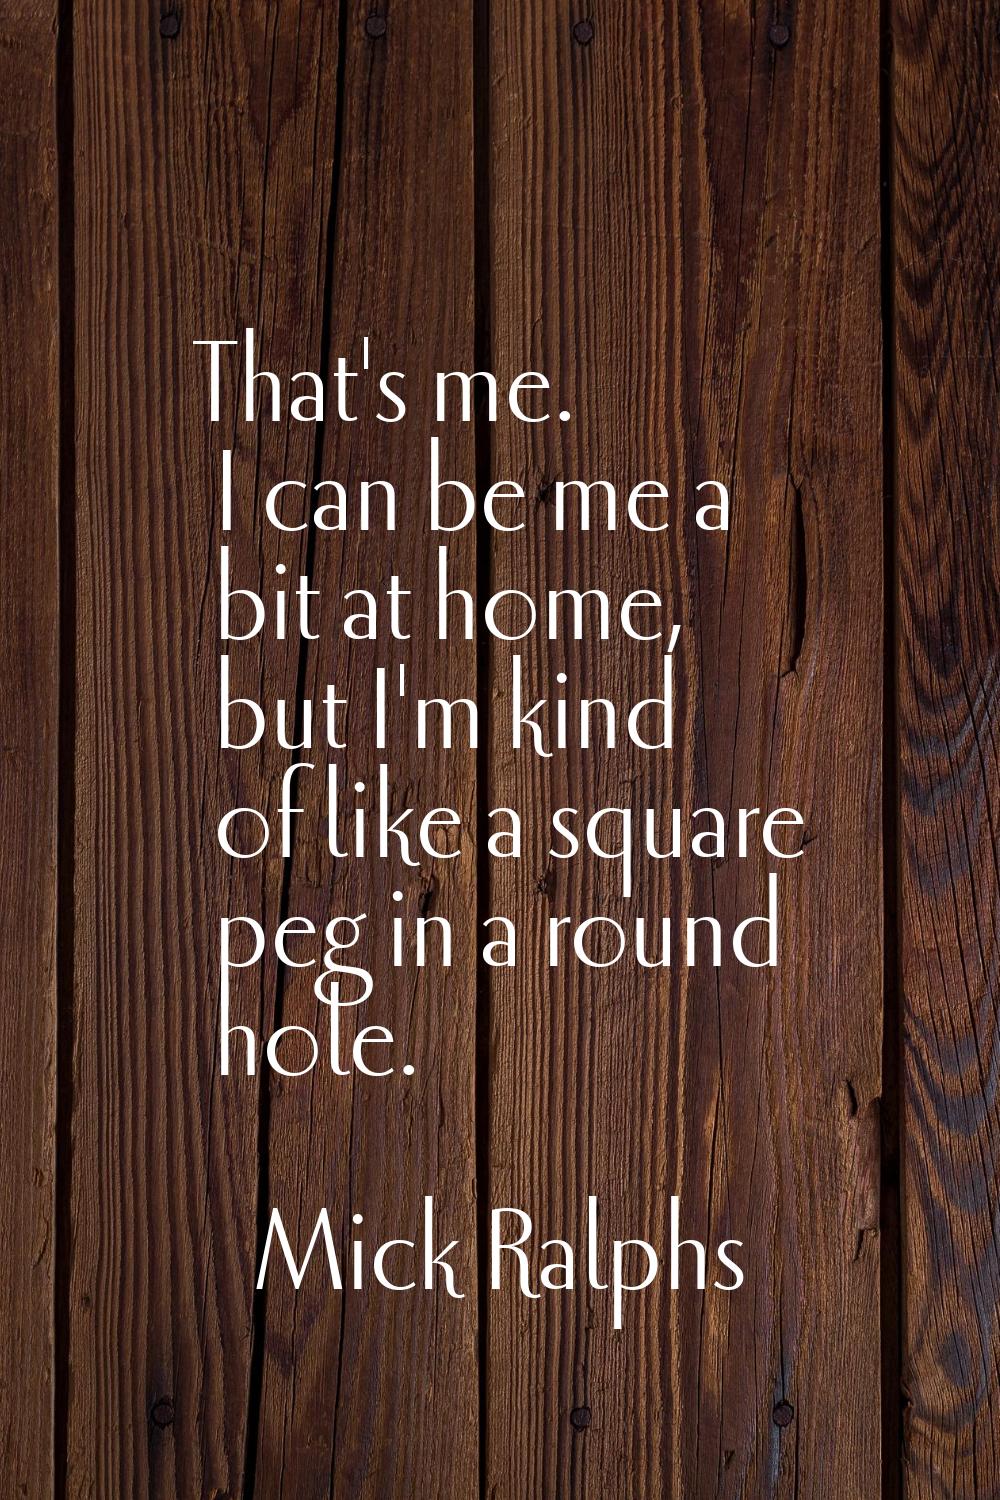 That's me. I can be me a bit at home, but I'm kind of like a square peg in a round hole.